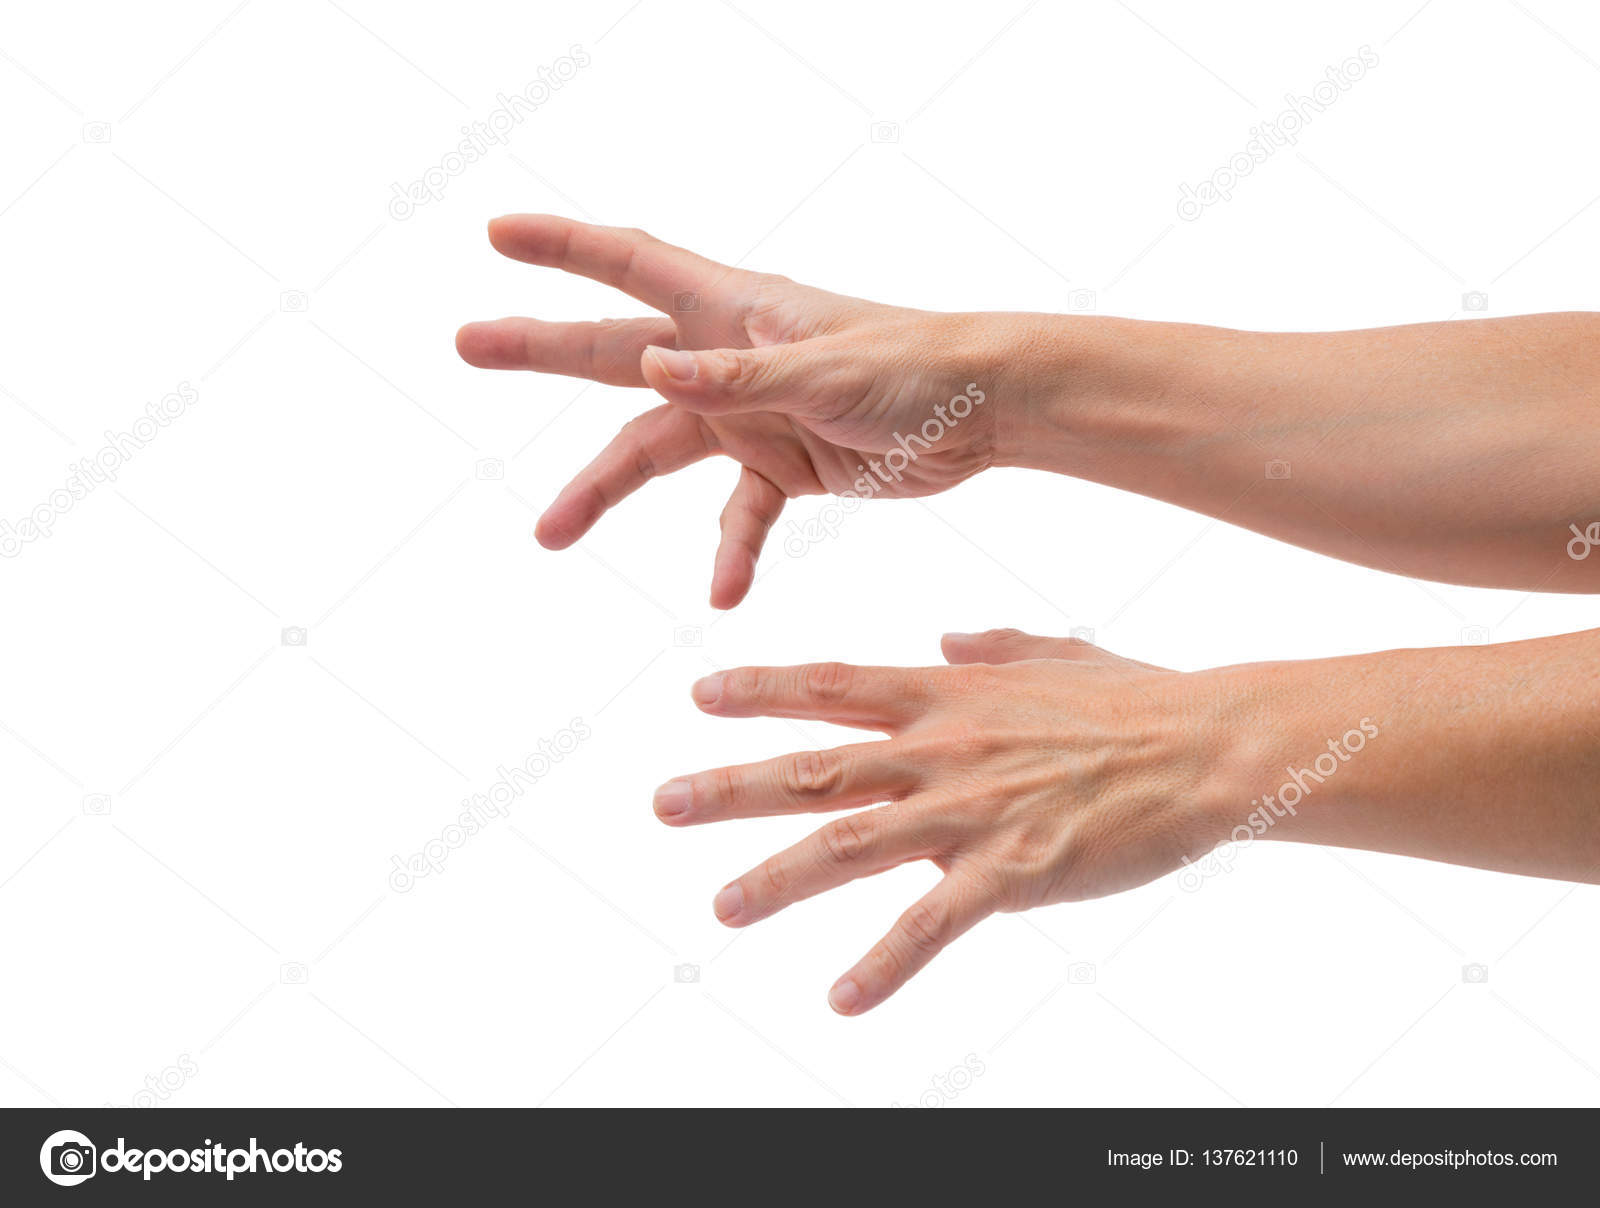 asian male hands reaching out — Stock Photo © cpoungpeth #137621110